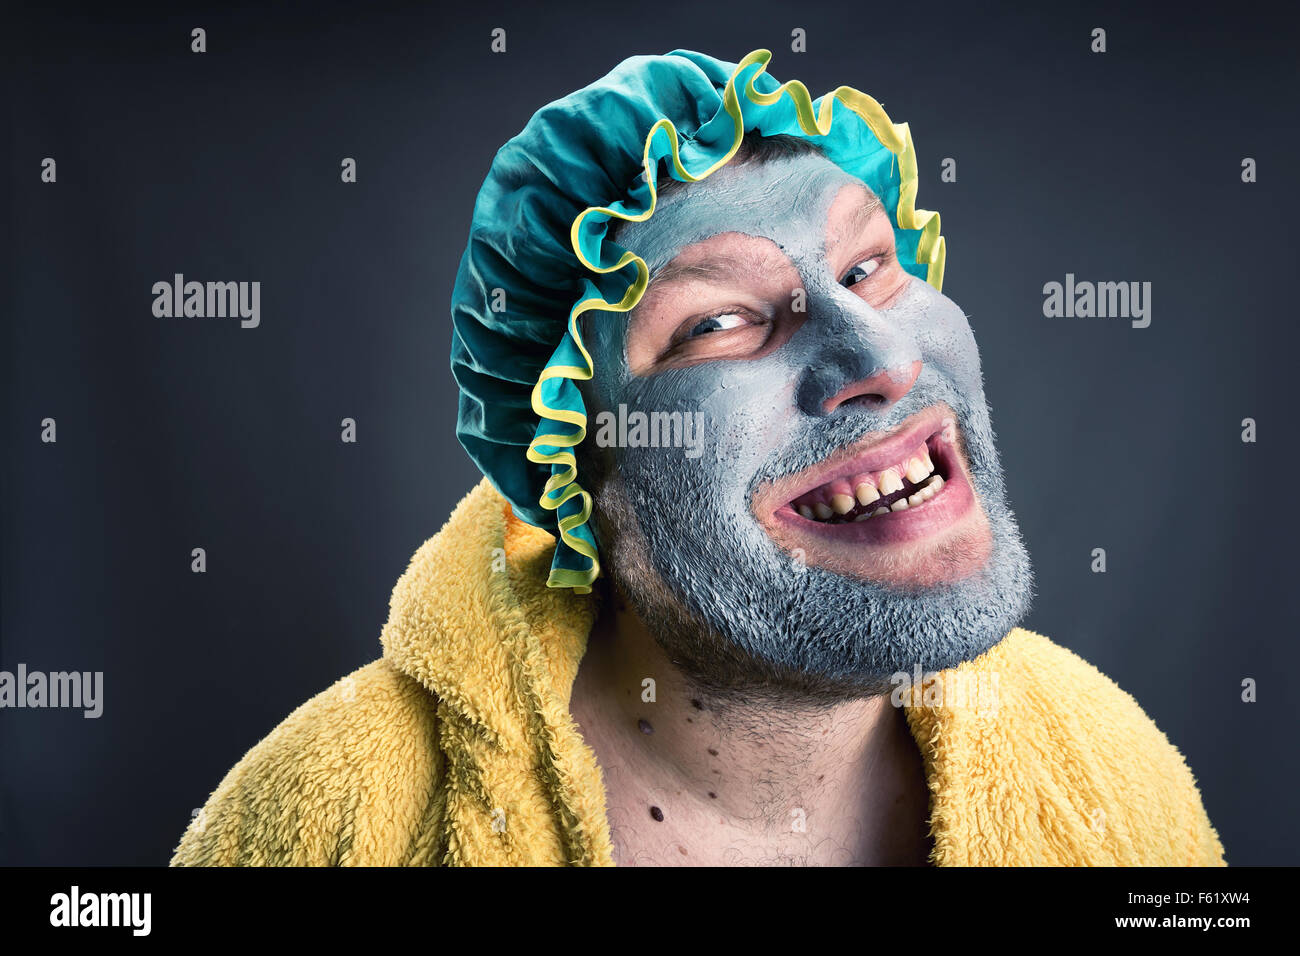 Crazy man with face pack. Closeup view Stock Photo